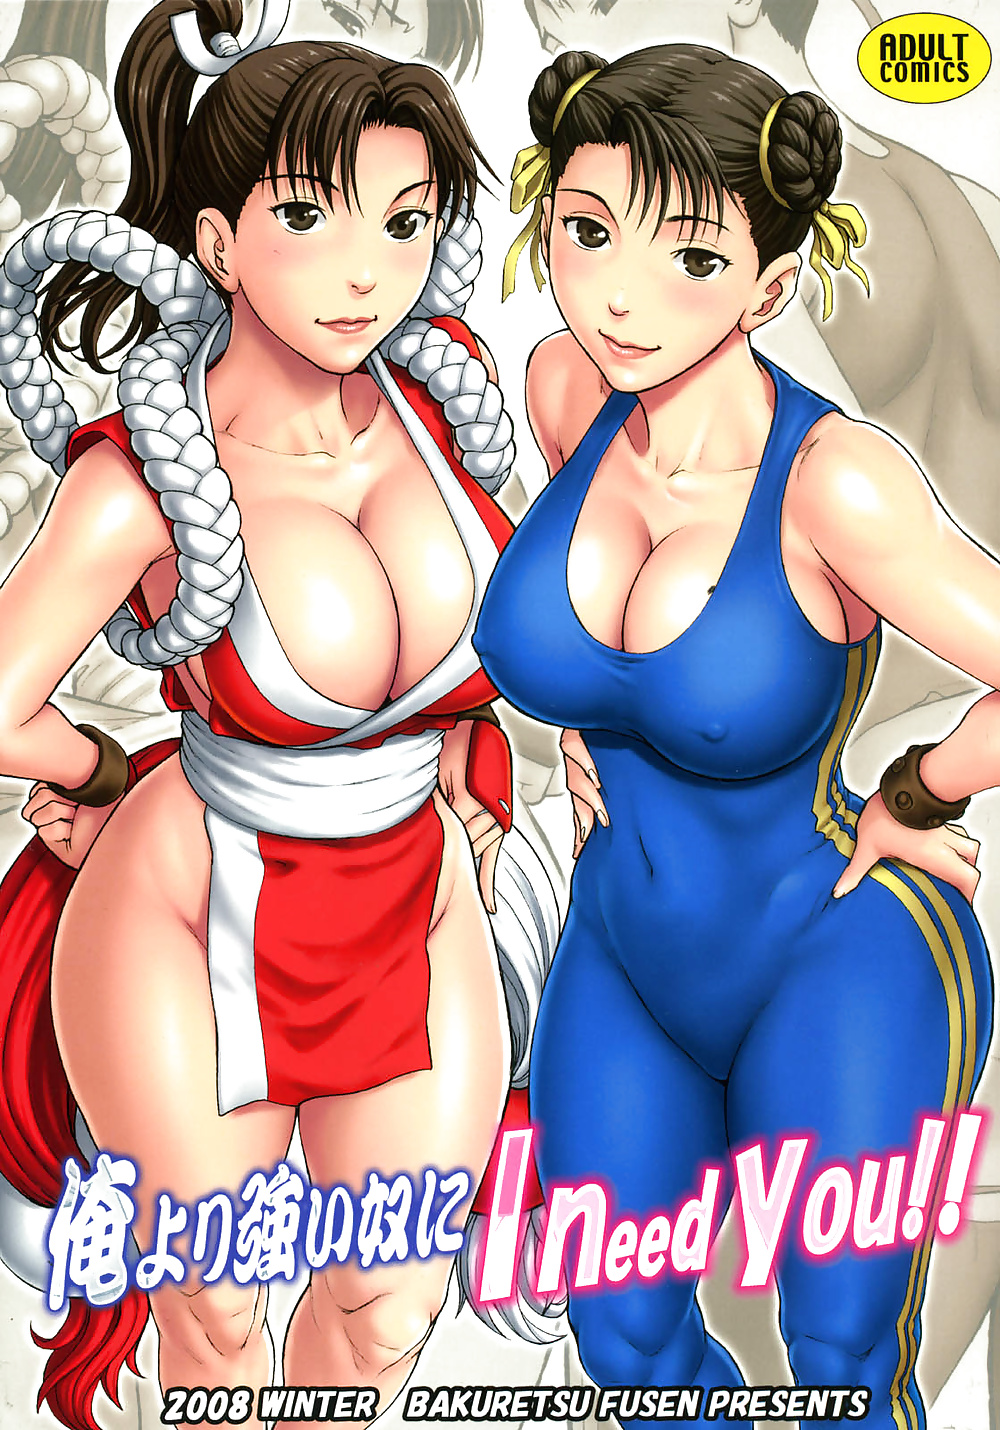 Hentai - Street Fighter and King of Fighters - I Need You!! #26770336